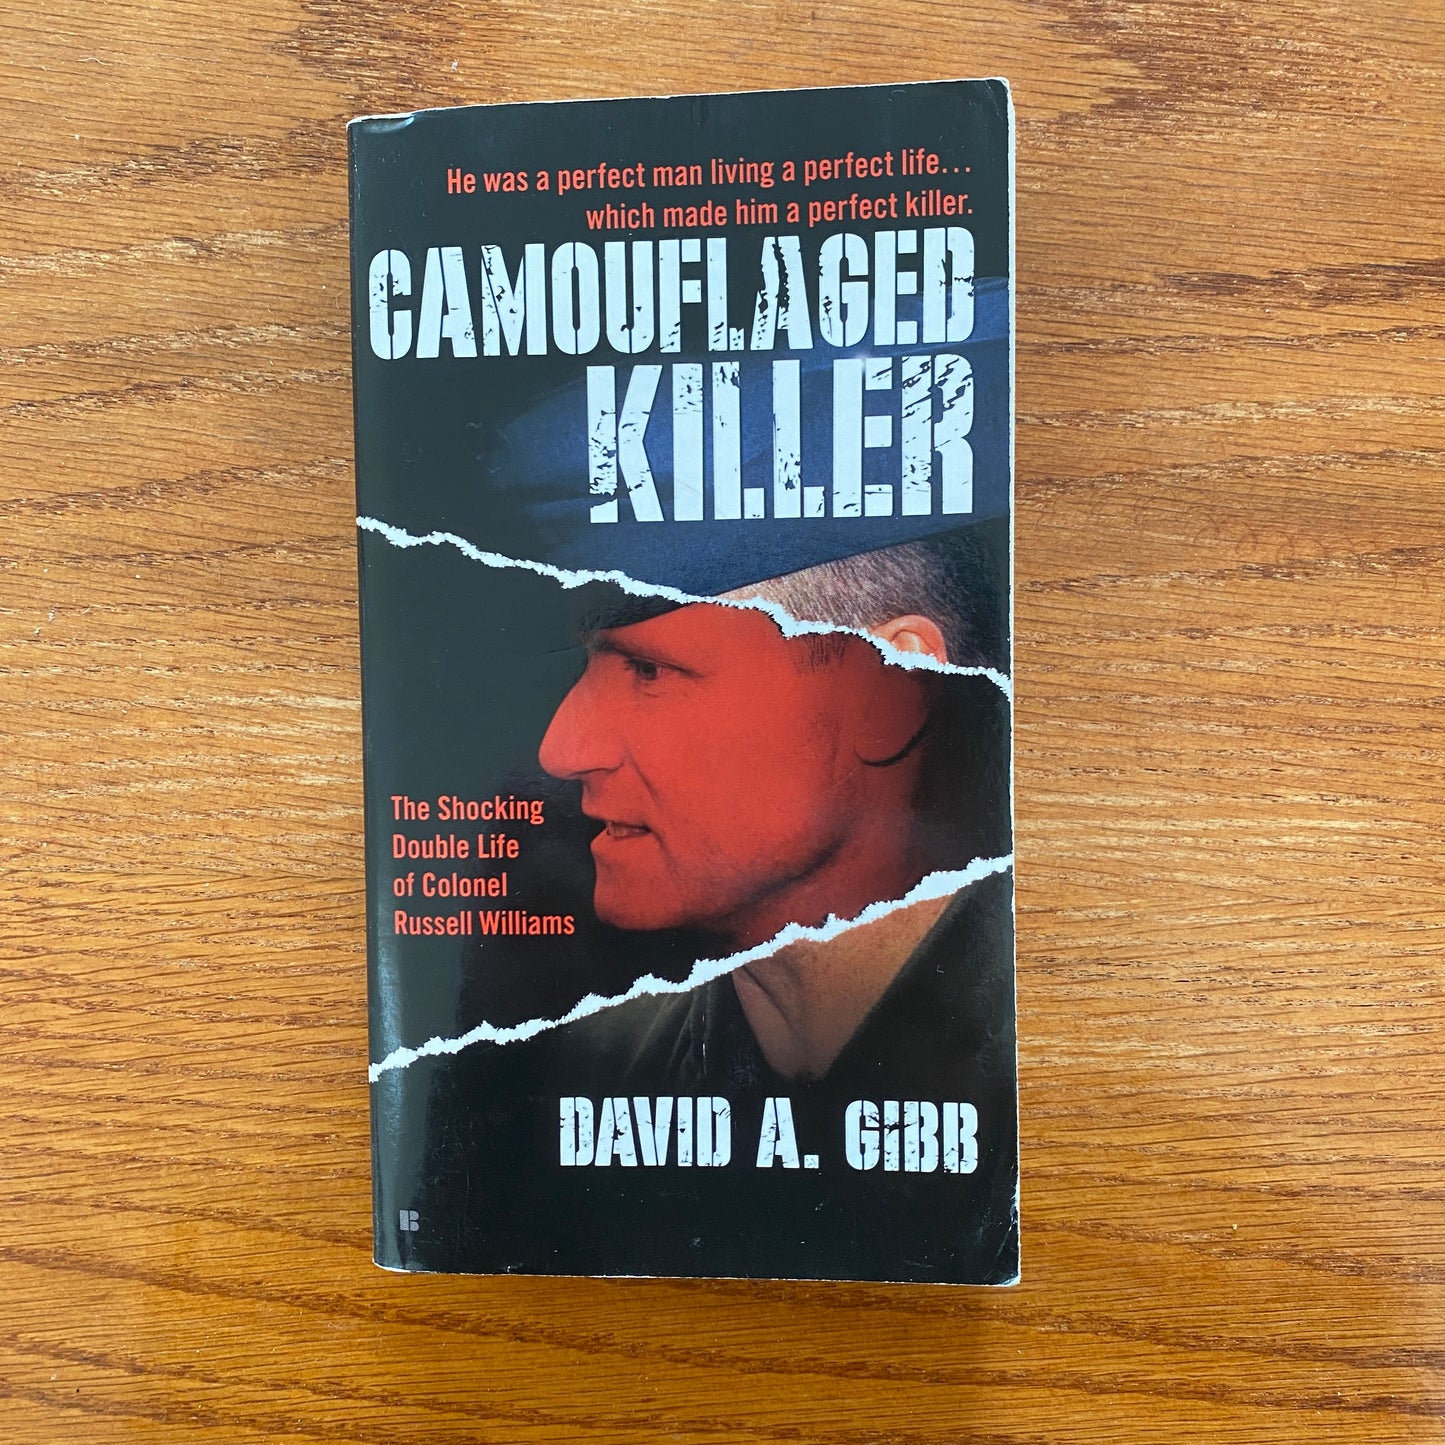 The Camouflaged Killer: The Shocking Double Life of Colonel Russell Williams - David A. Gibb